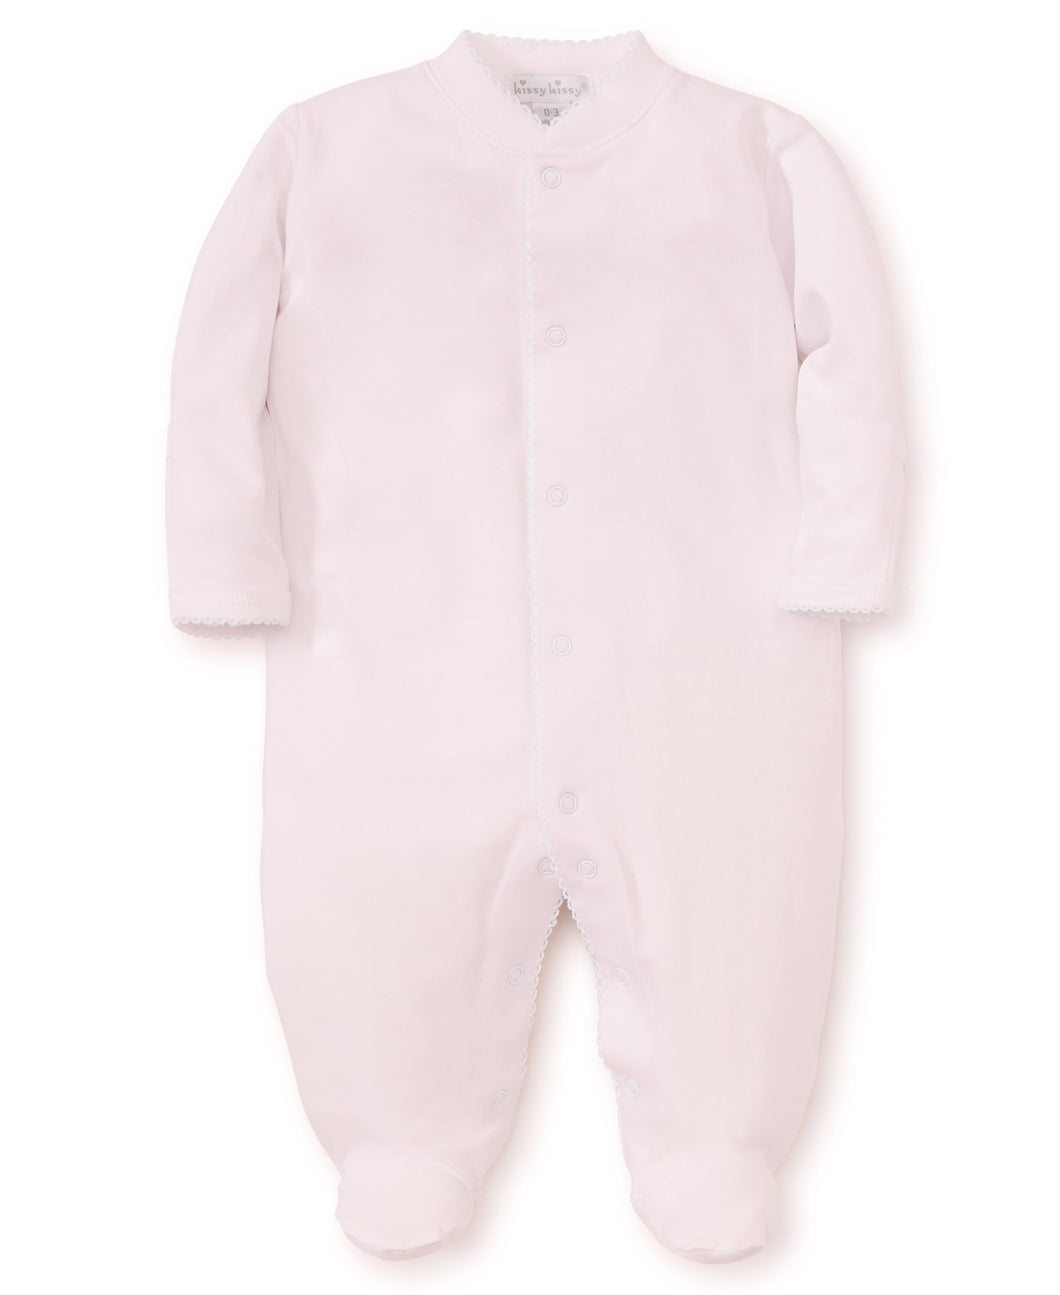 Kissy Kissy Solid Basic Footie in Light Pink